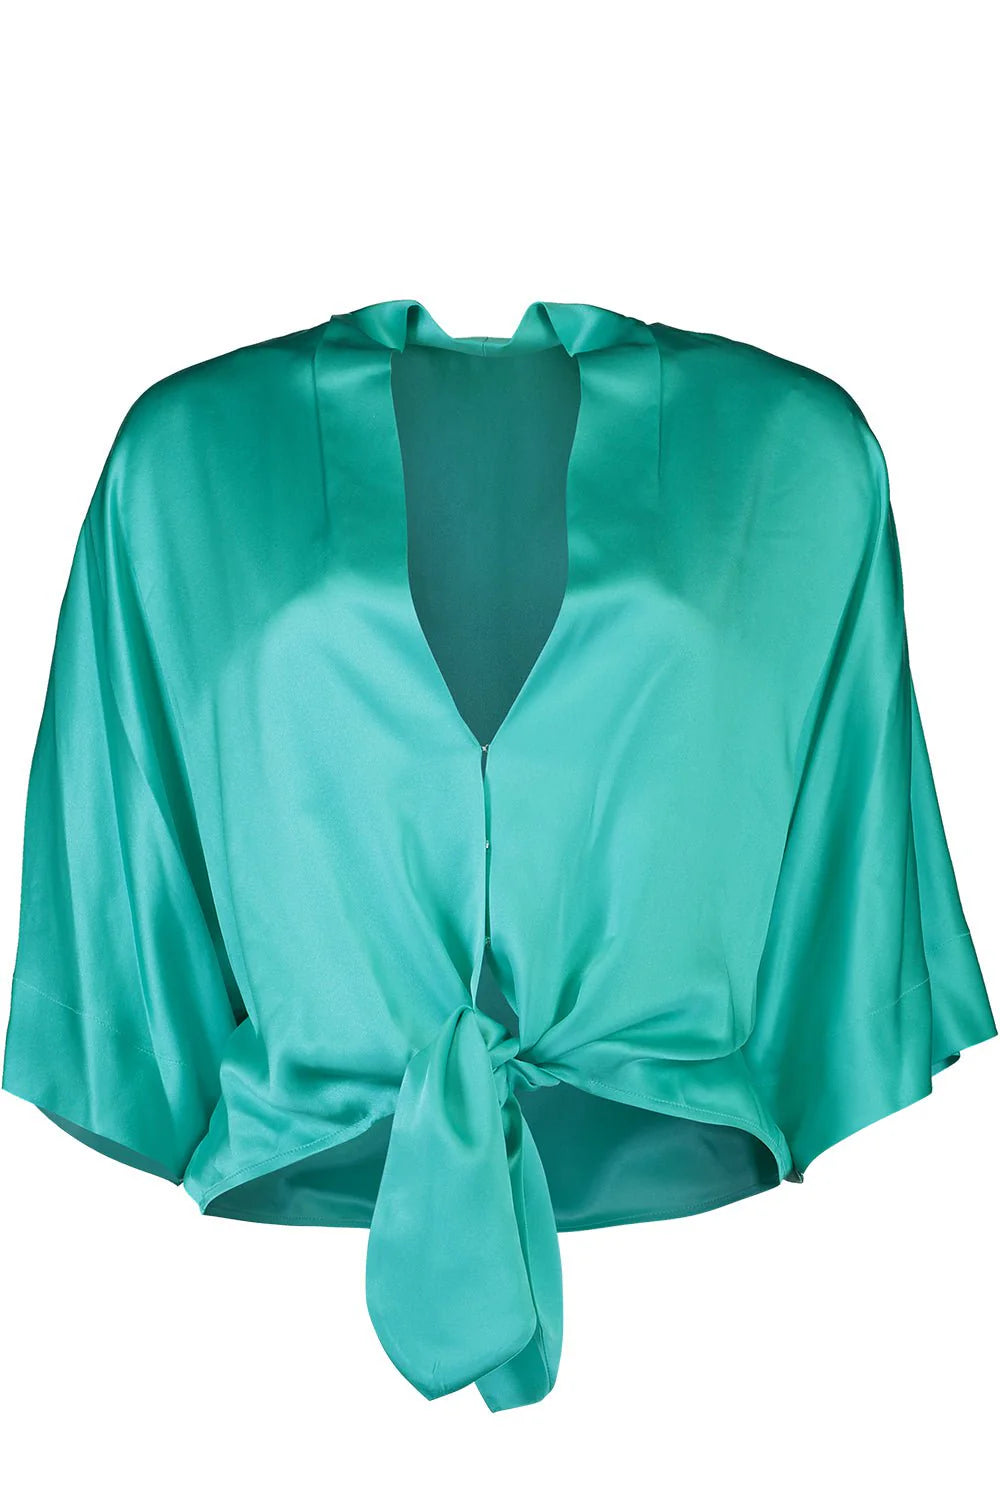 Dolman Tie Front Blouse in Turquoise